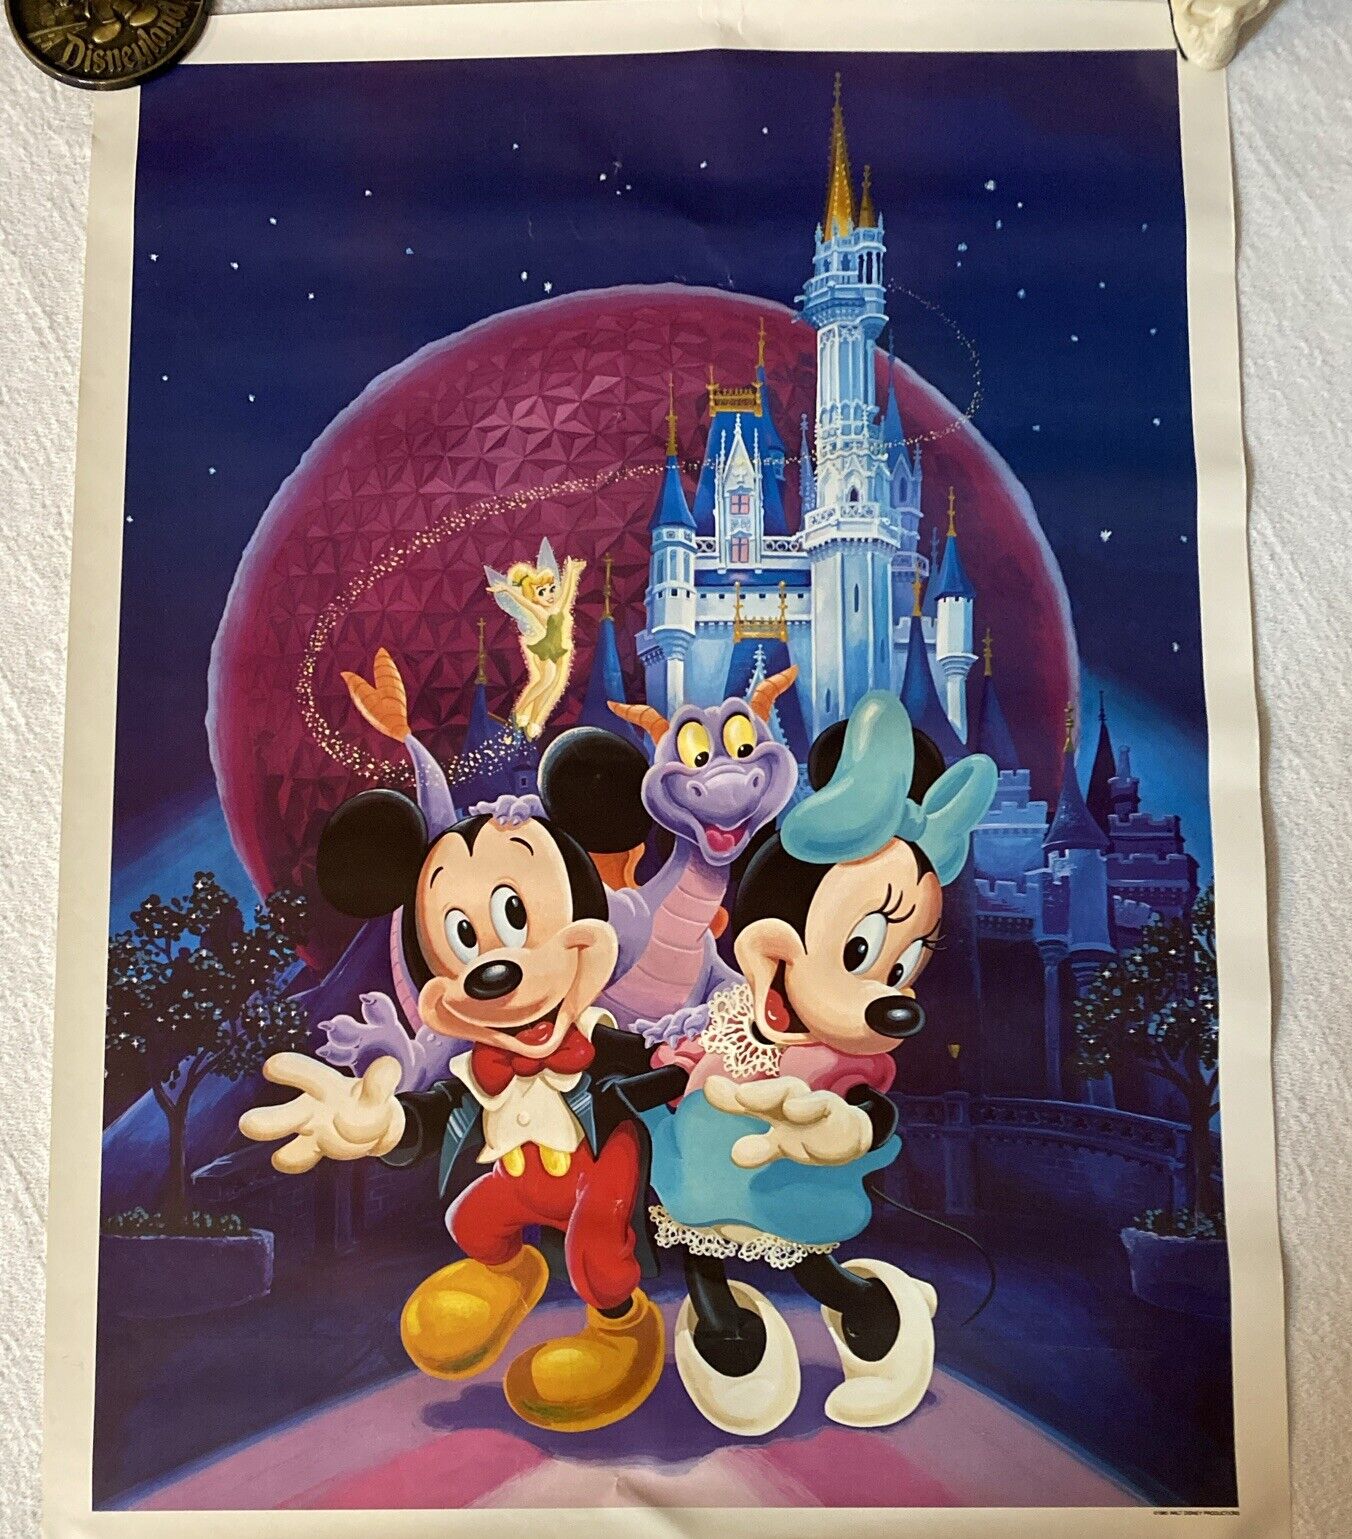 VTG 1985 Disney Epcot Figment Mickey & Minnie Mouse Tinkerbell Poster Art 16x22